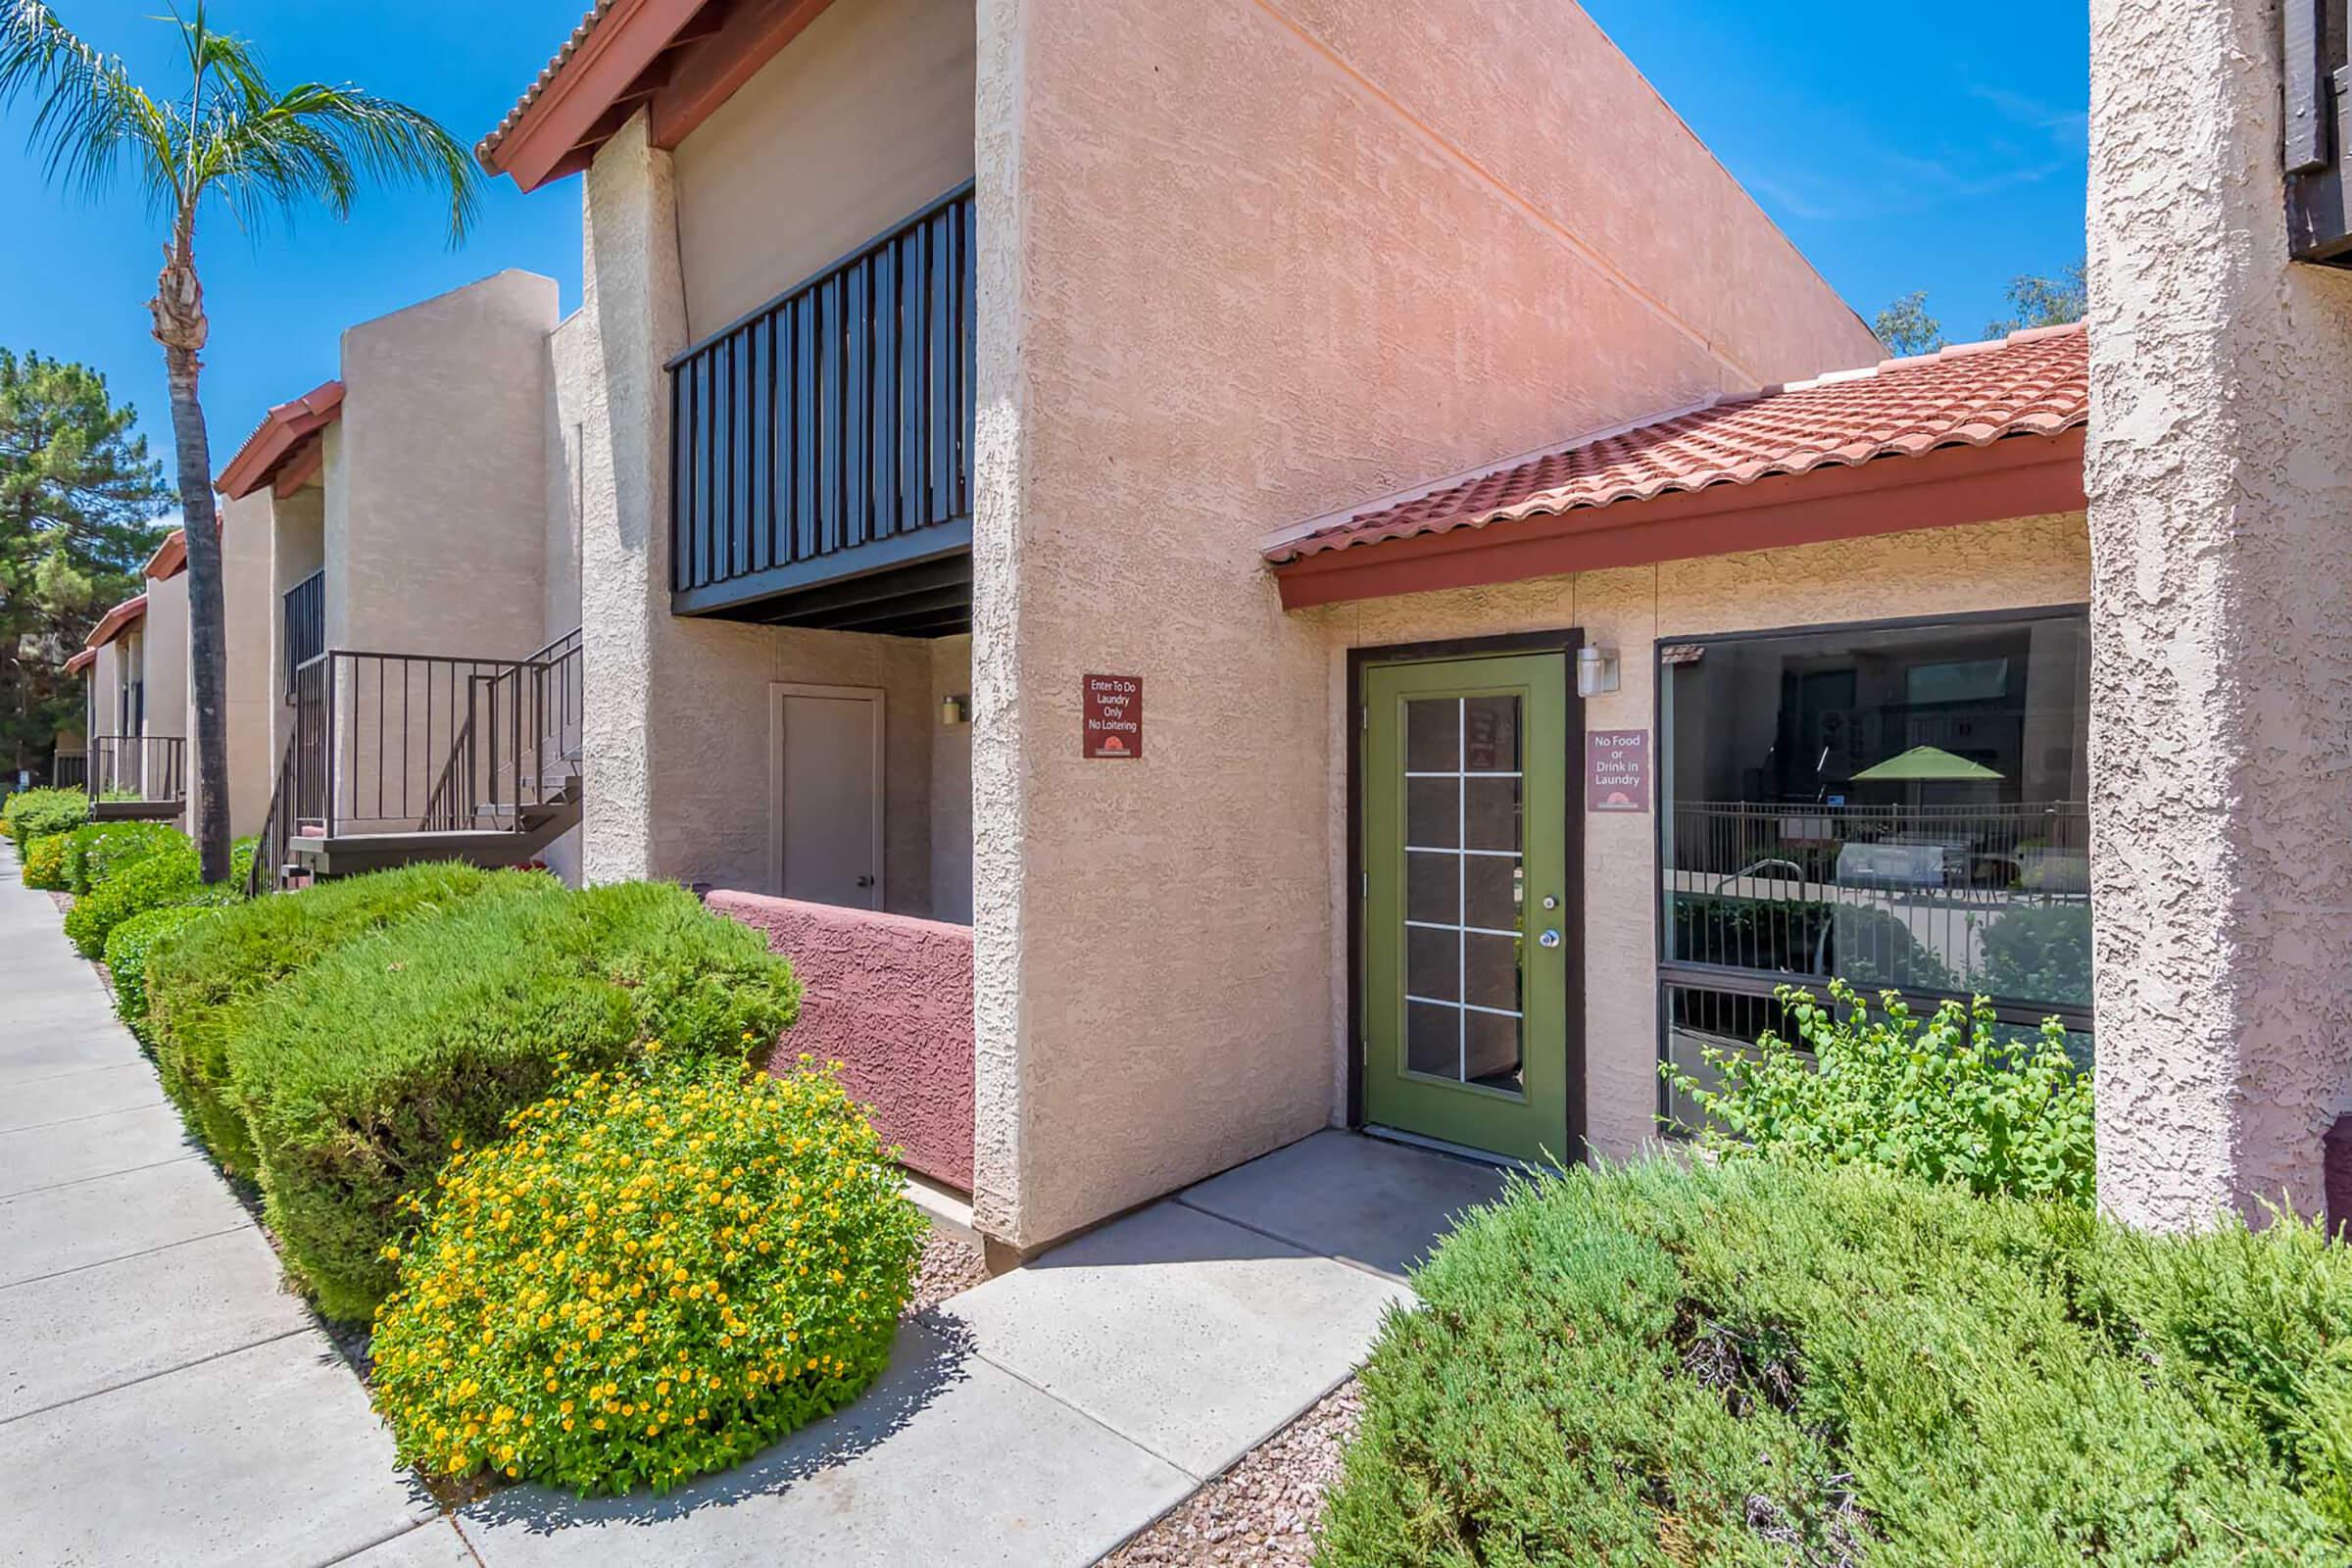 Well-maintained Grounds and Landscaped Greenery - Glenridge Apartments - Glendale - Arizona